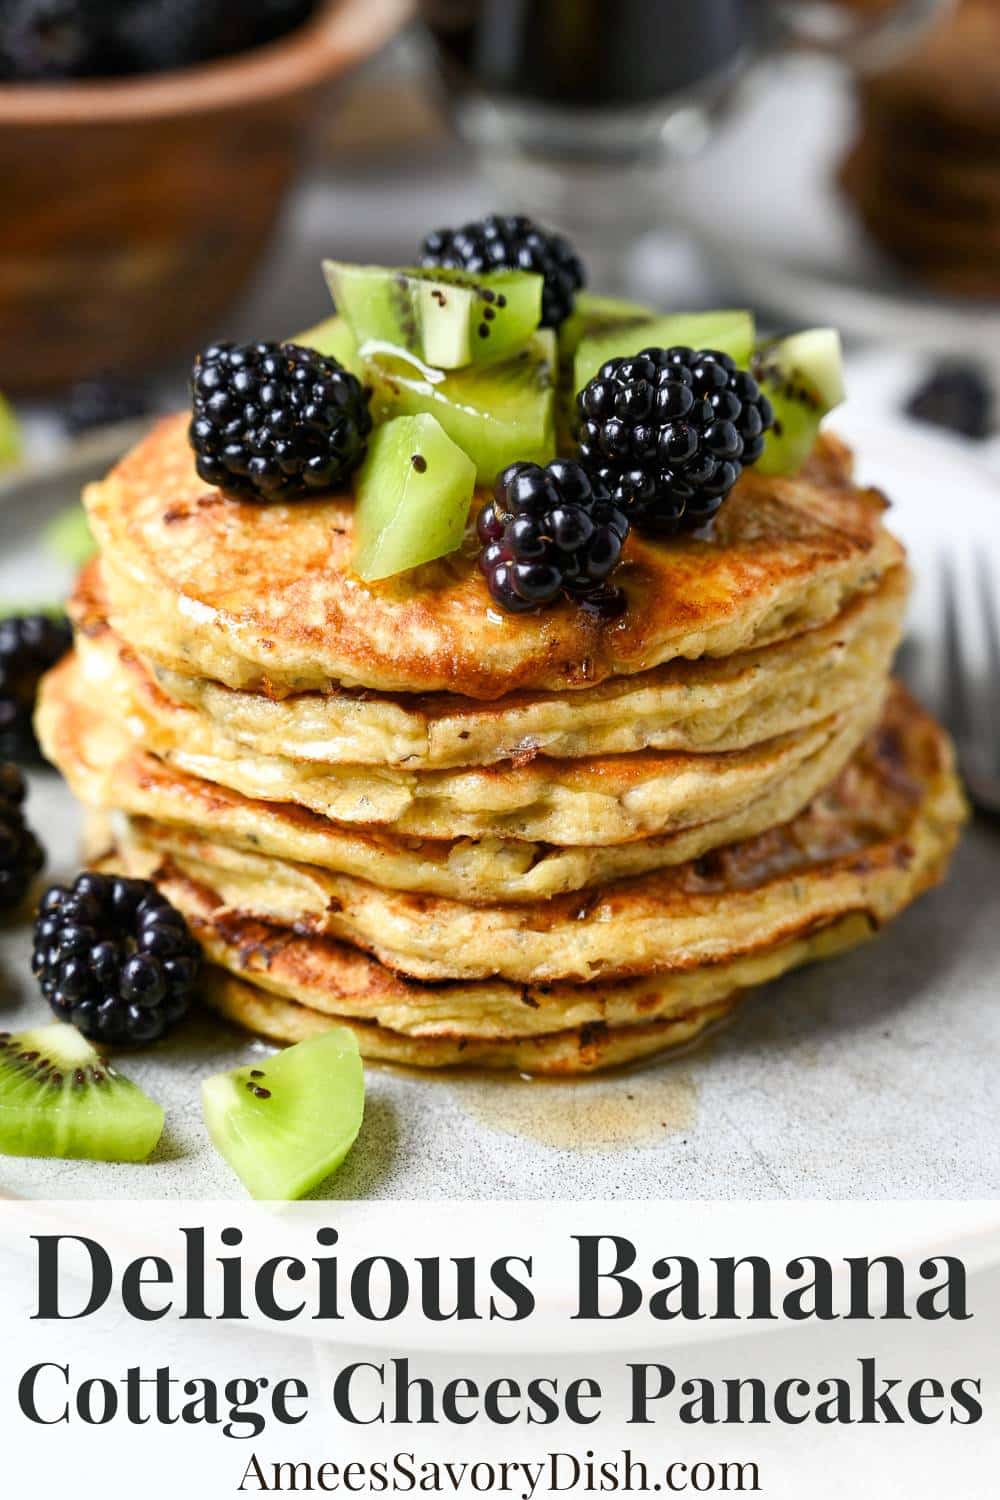 These banana cottage cheese pancakes are a great way to start your day with each serving packed with over 25 grams of protein! via @Ameessavorydish